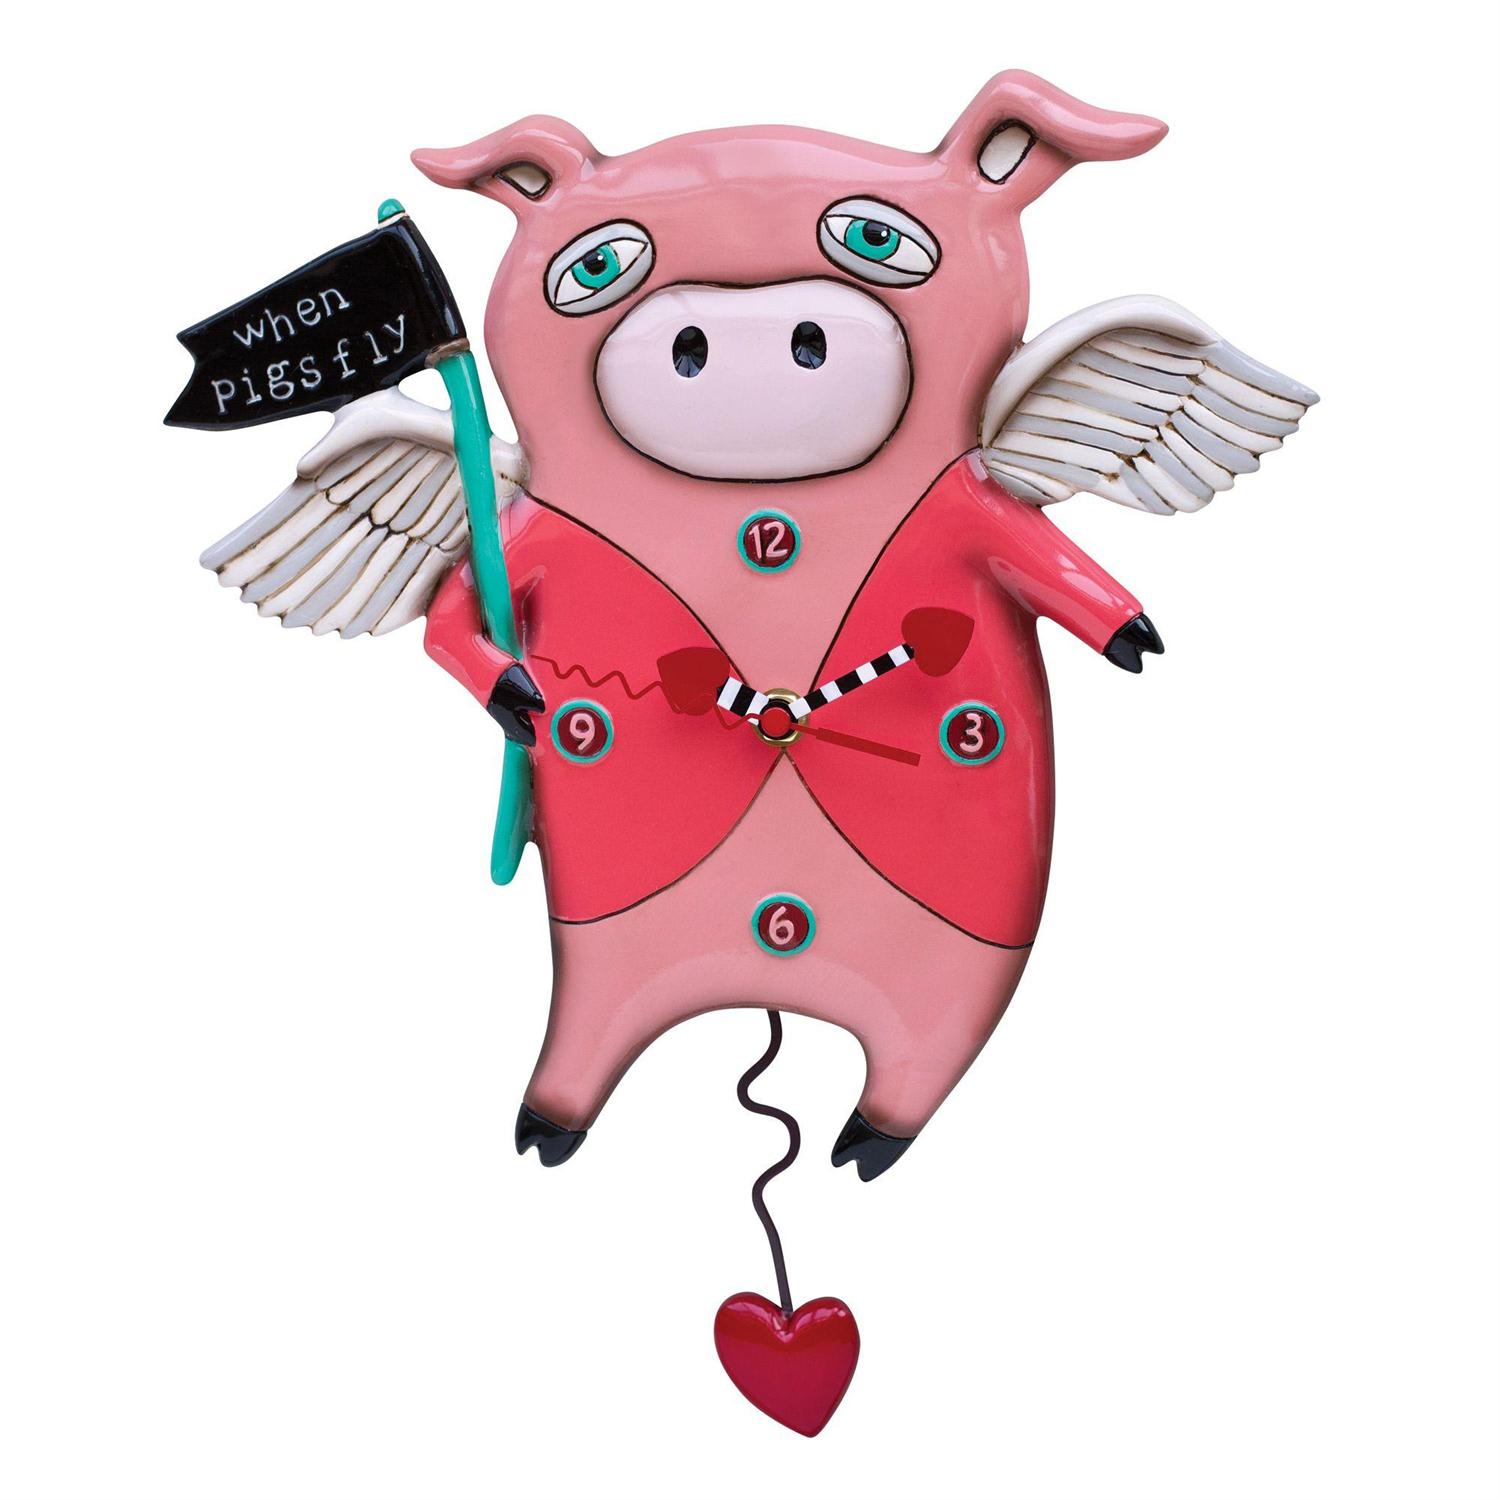 Allen Designs -Pigs Fly - Description  When Pigs Fly ! This clever clock tells the story of a little piggy getting its wings, and a great reminder that great things are possible if you put your mind to it! We love this pig's cute ears, feathery wings, and swinging heart pendulum.  Clock 13.5in H Requires 1 &quot;AA&quot; battery